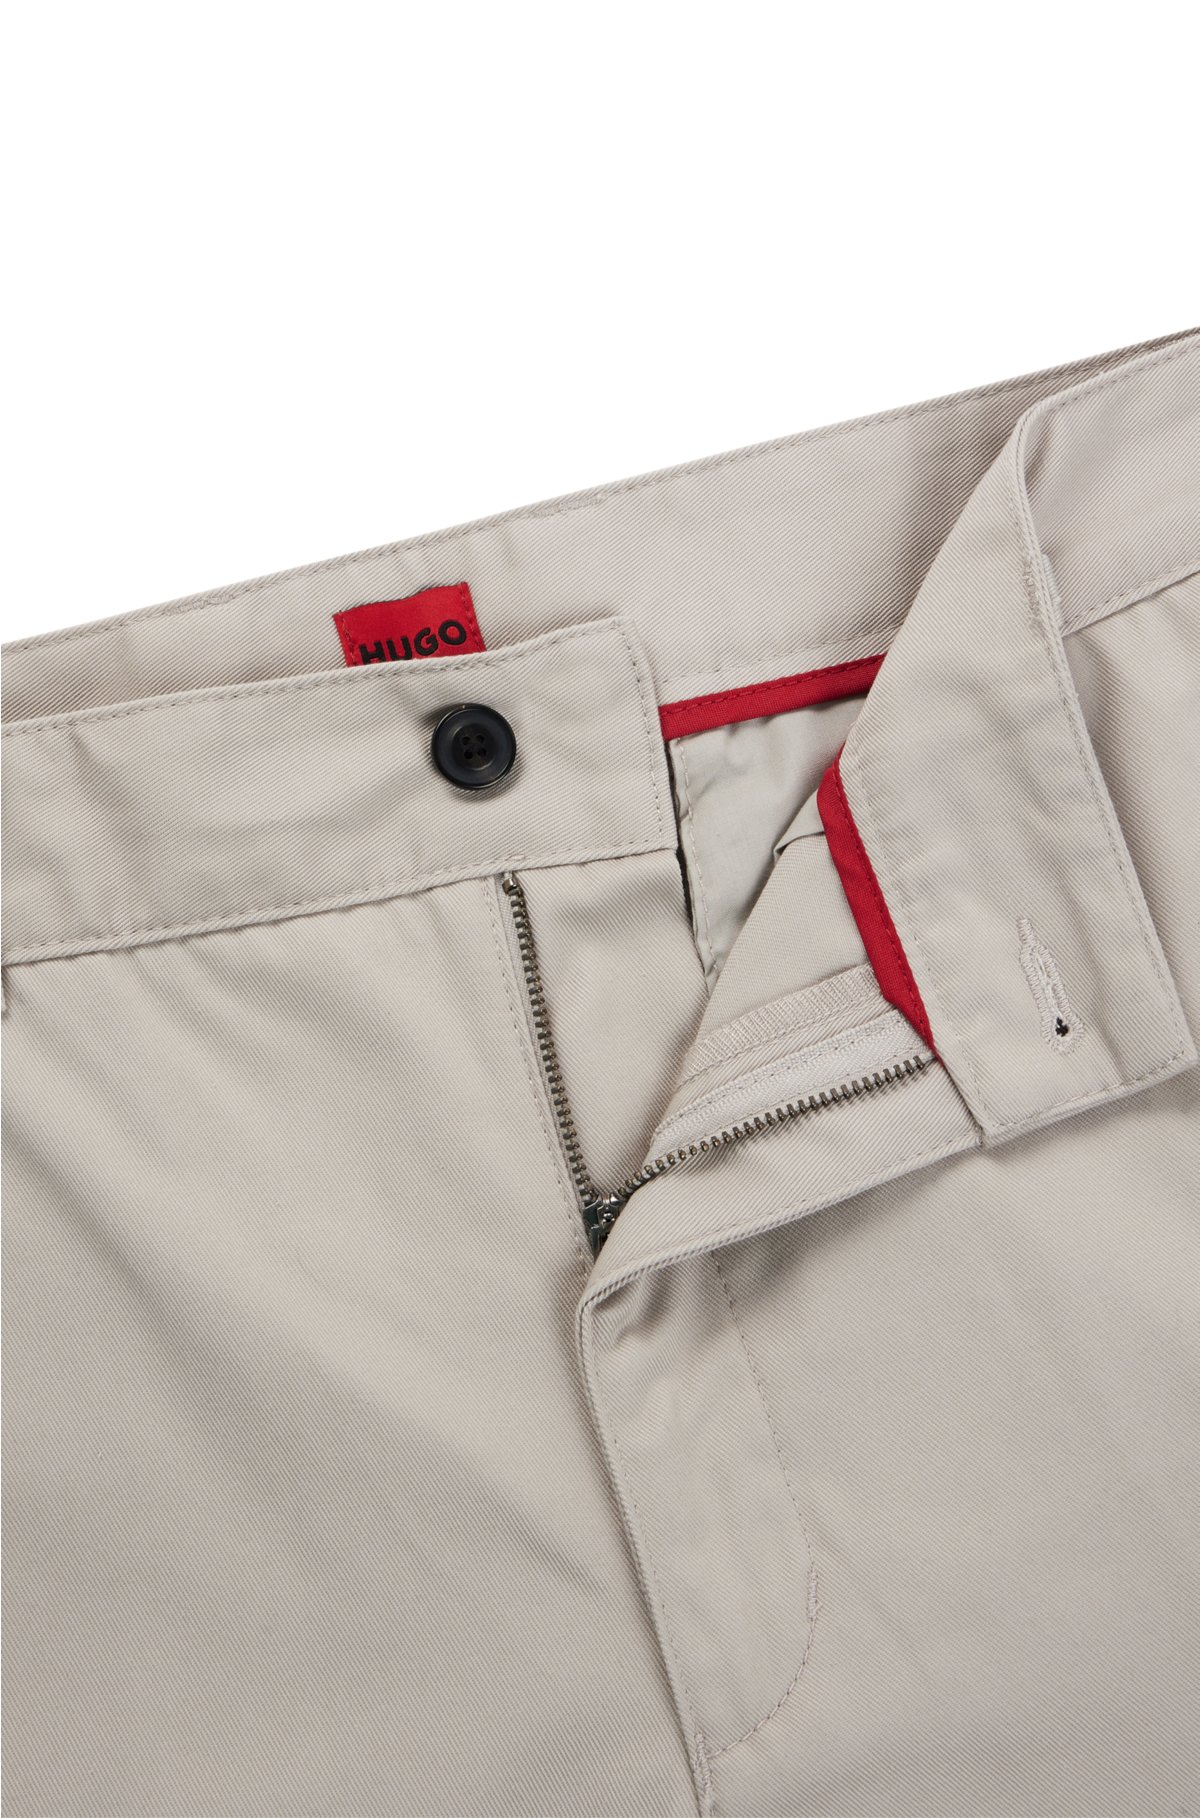 Regular-fit shorts with slim leg and buttoned pockets, Light Grey